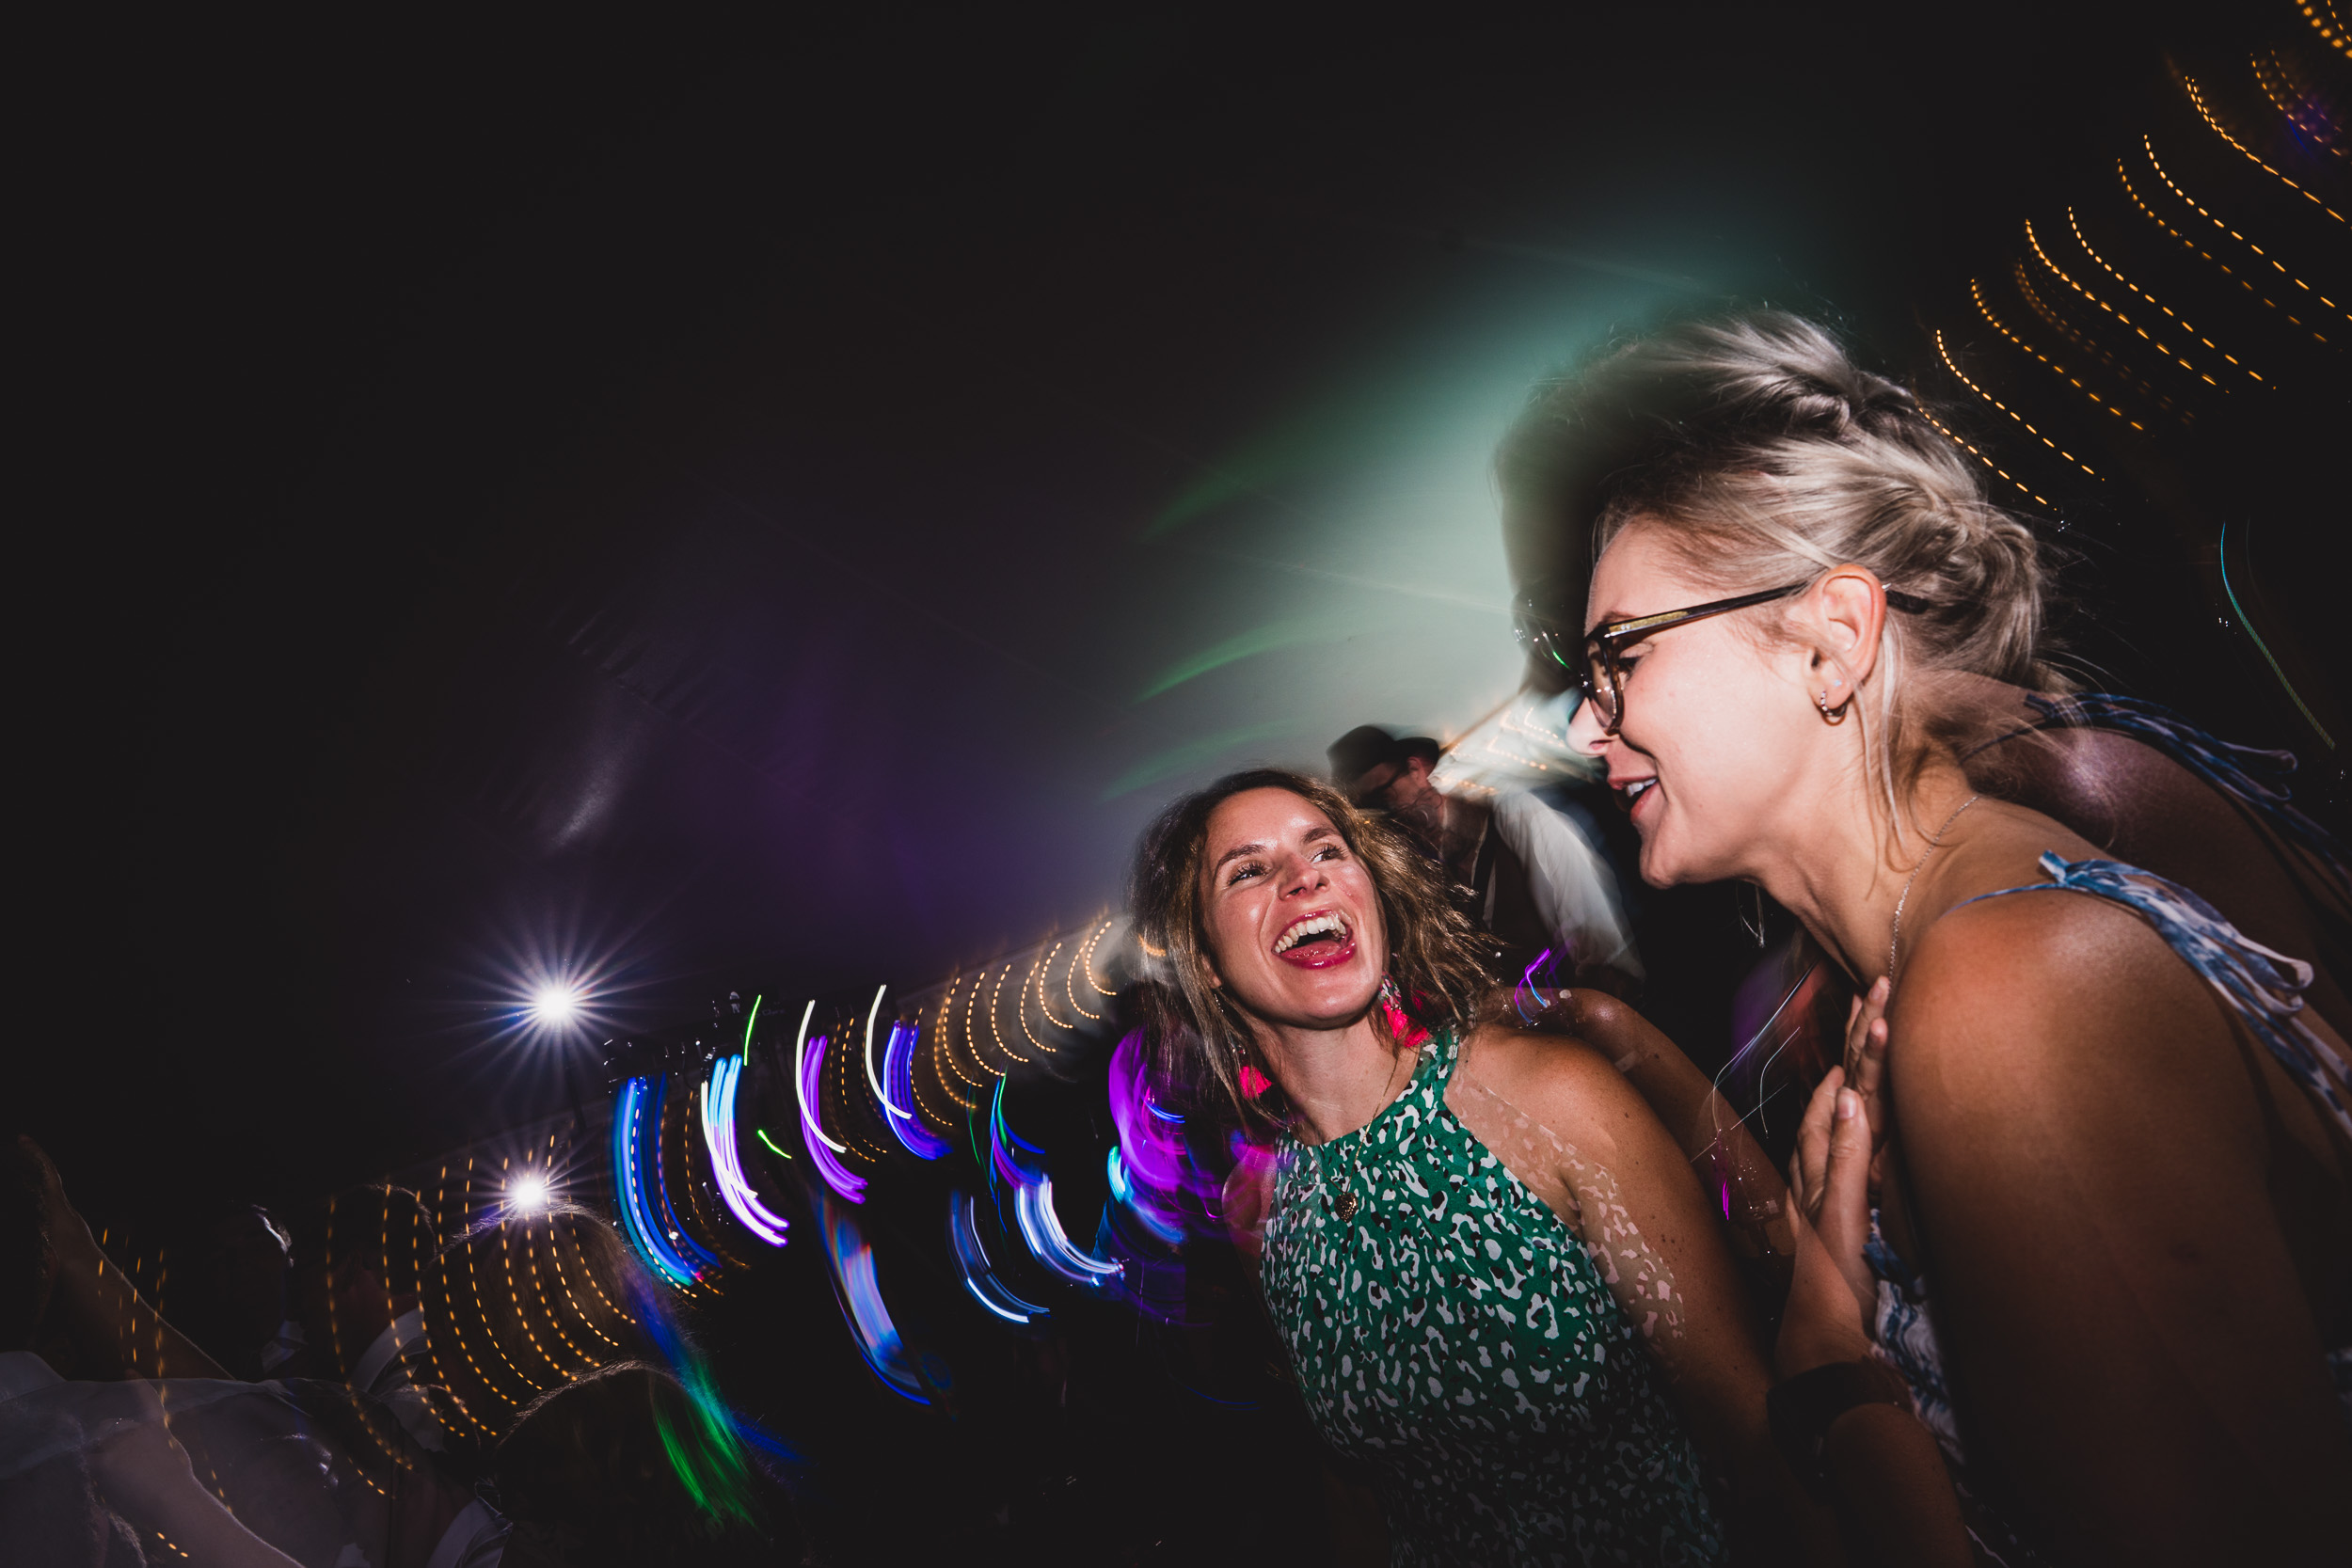 Two women, one as the bride, laughing with a wedding photographer at a party at night.